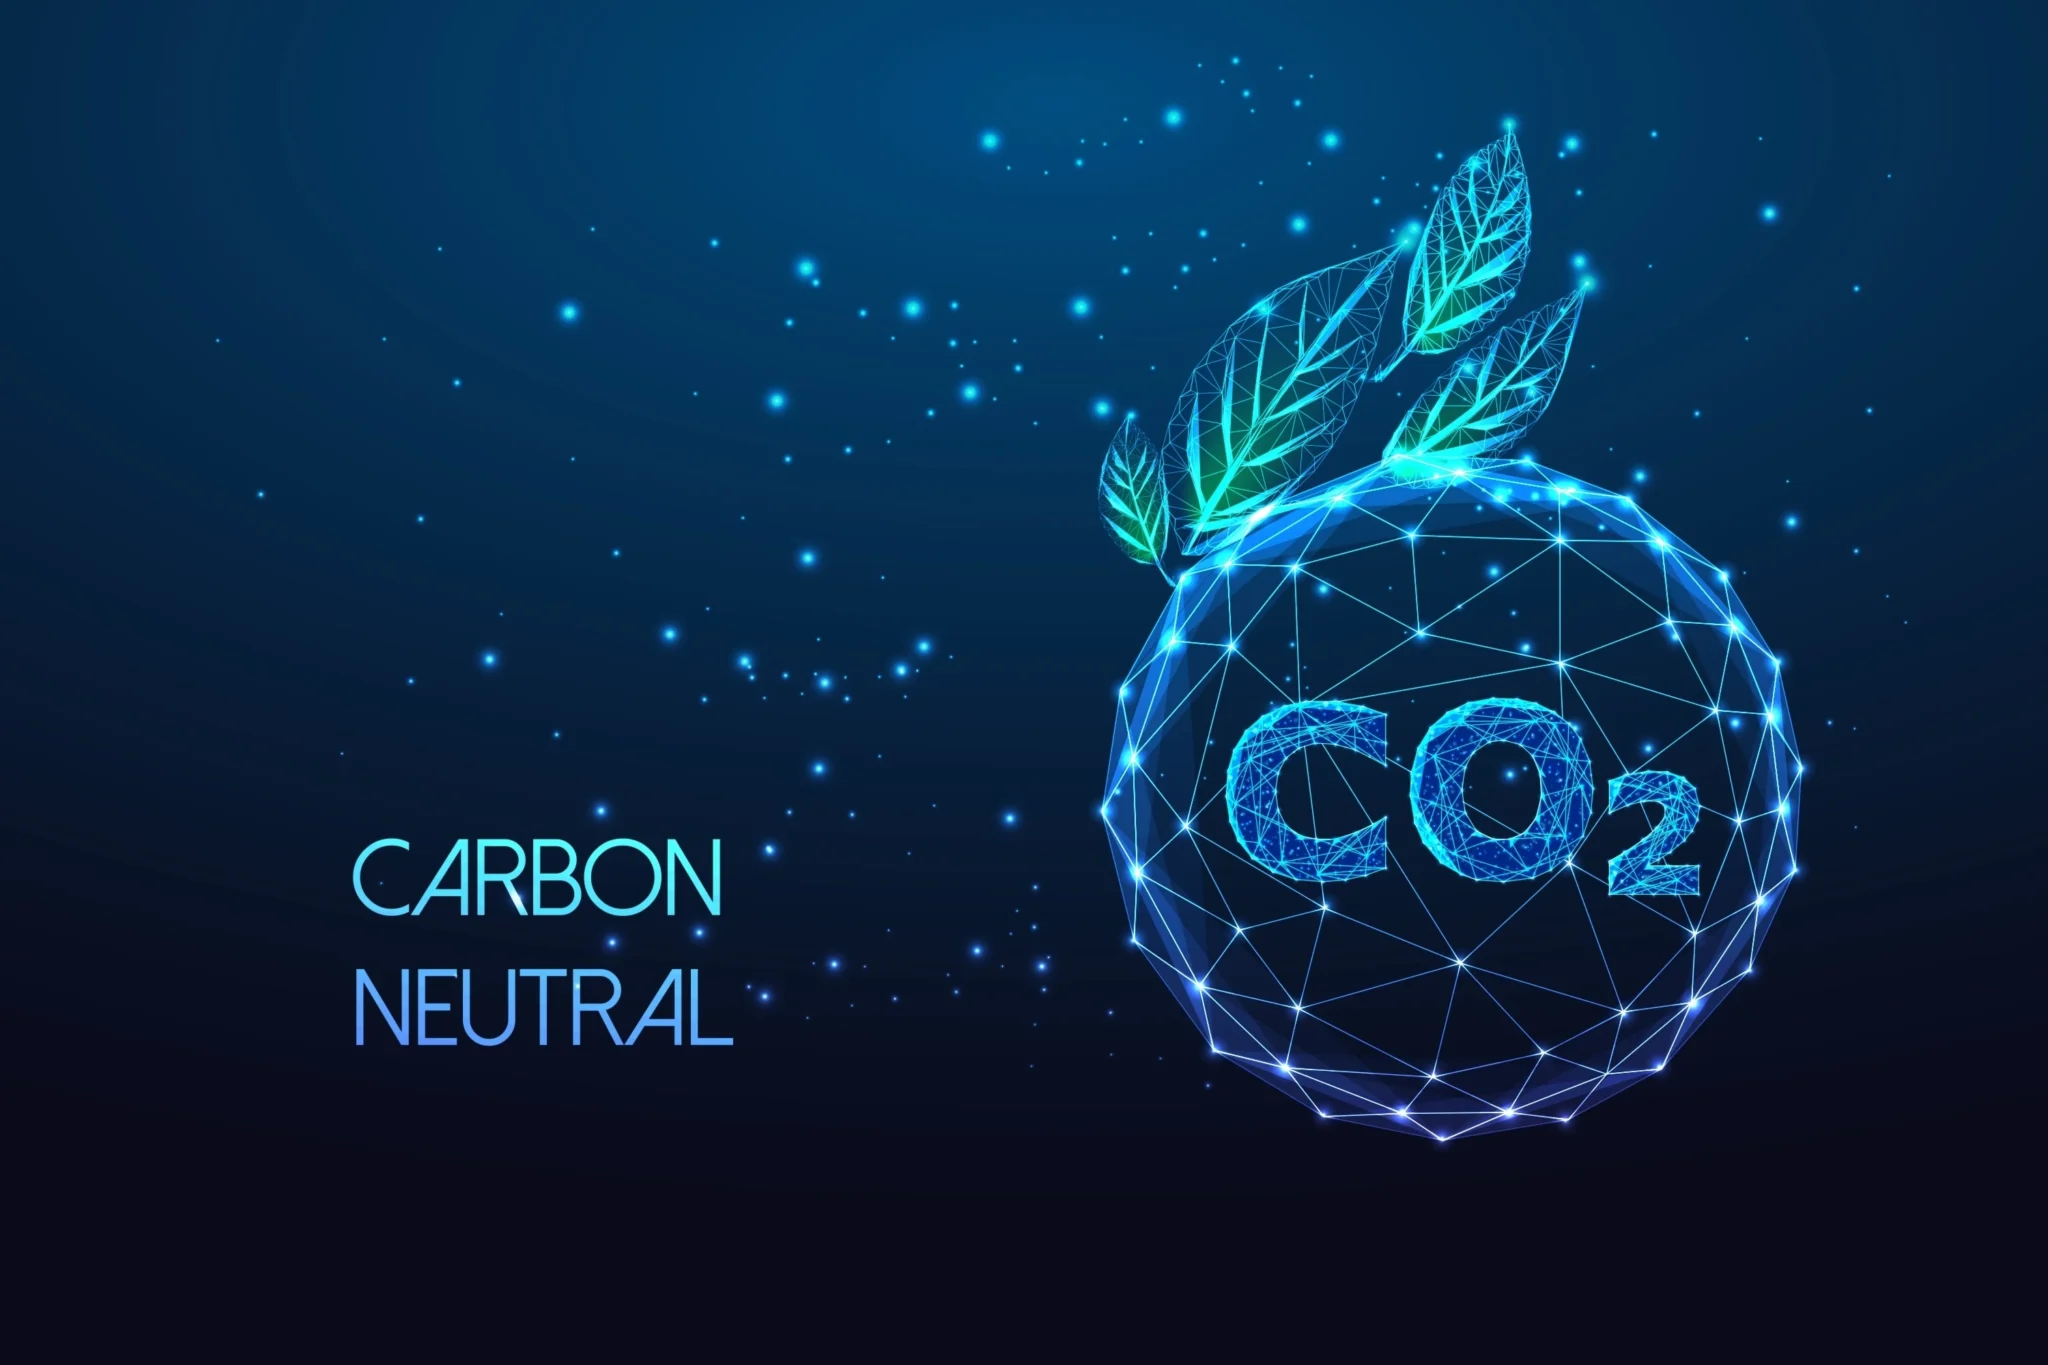 Visual representing a carbon credit unit containing one tonne of reduced or sequestered greenhouse gases.